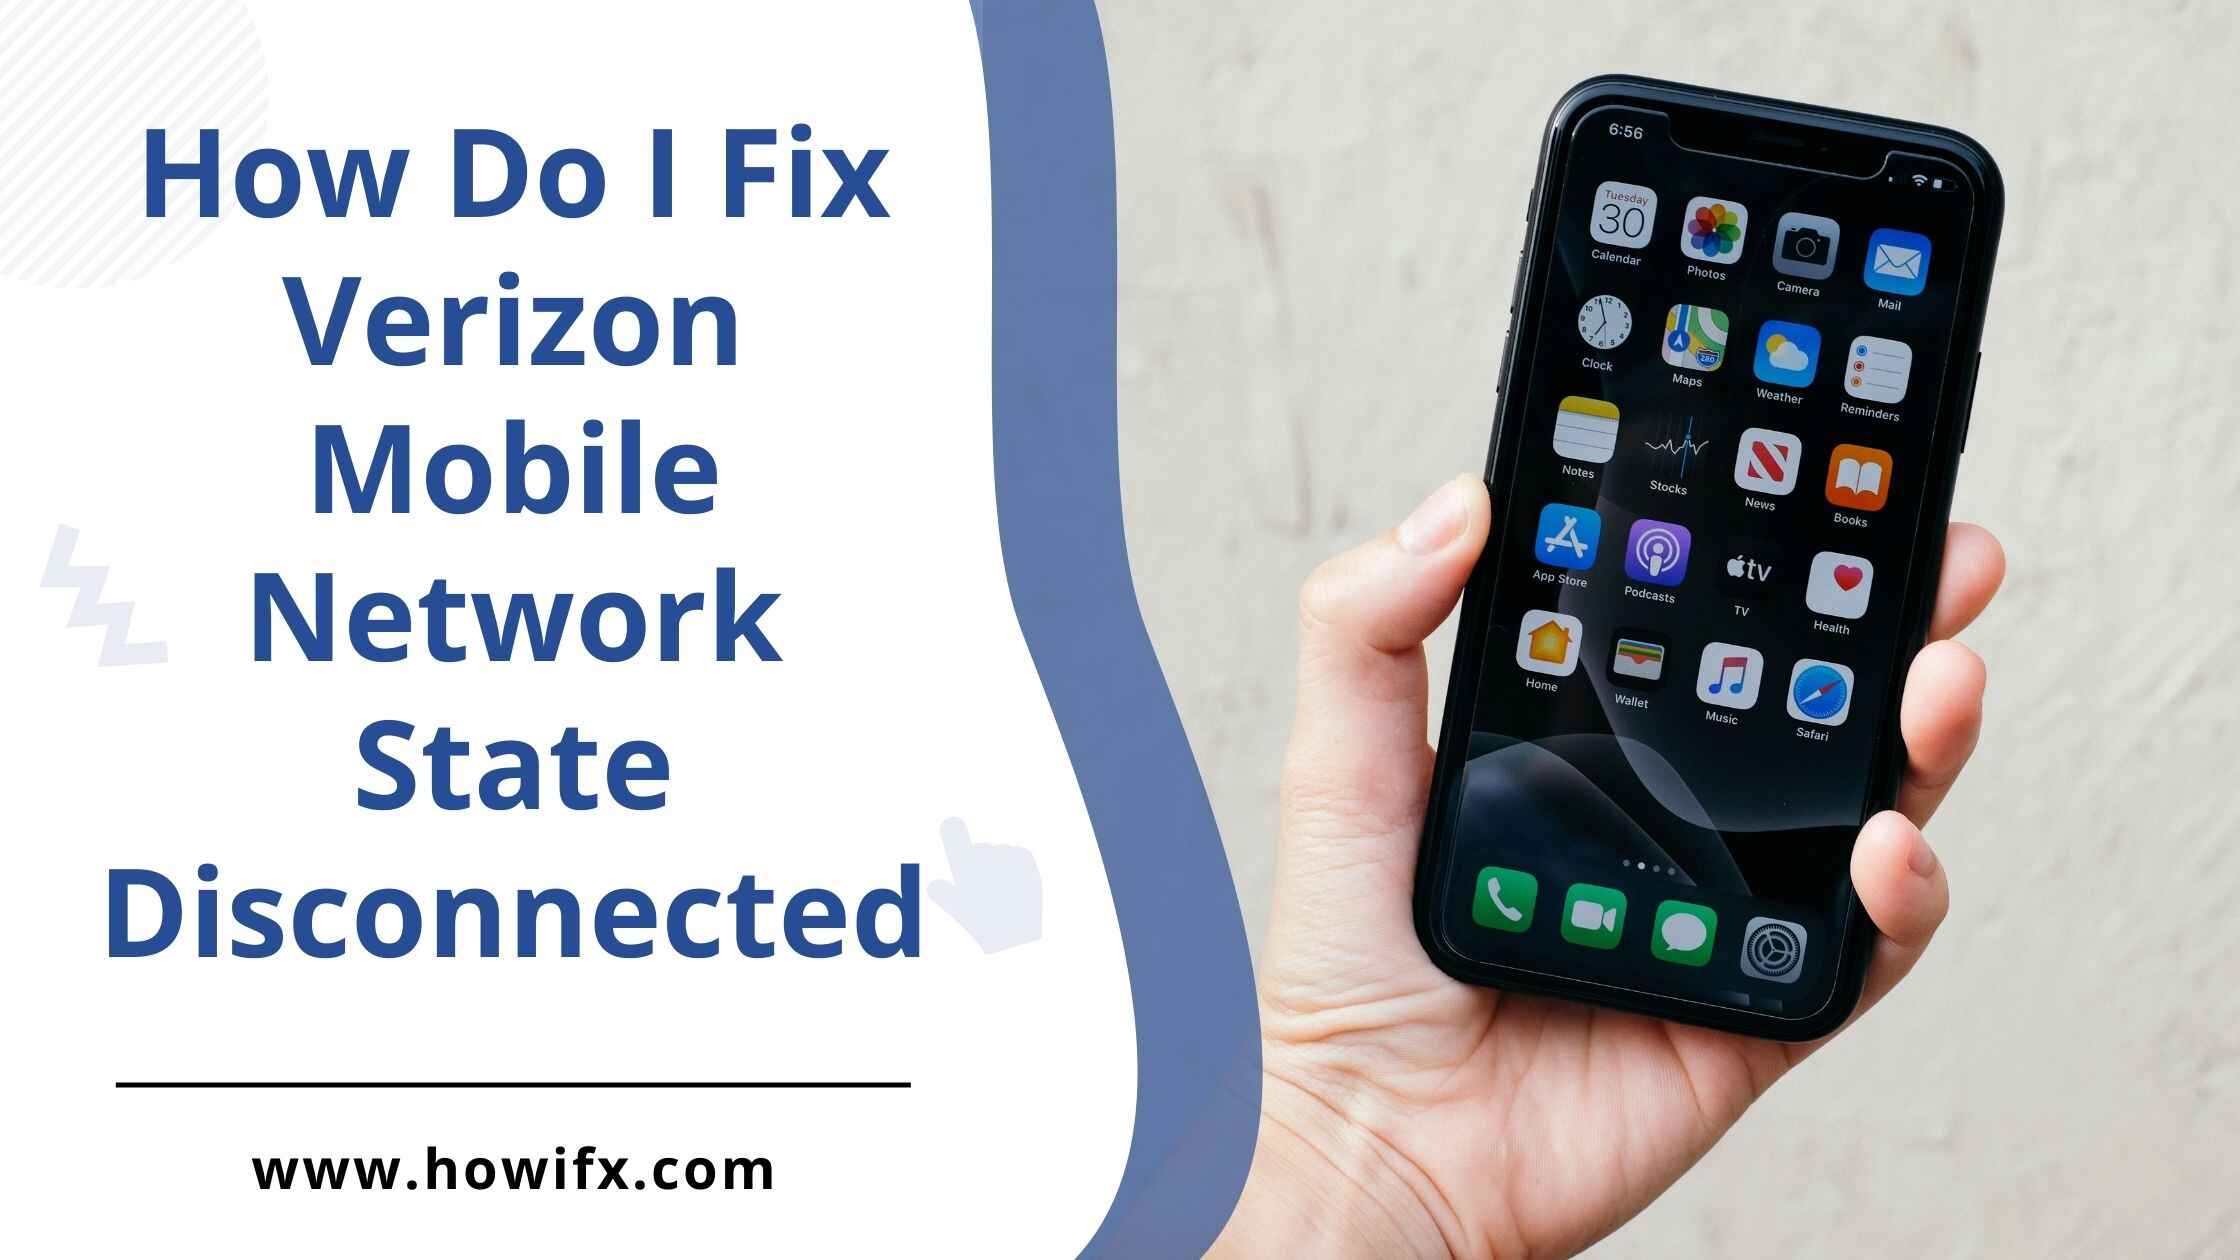 How Do I Fix Verizon Mobile Network State Disconnected?